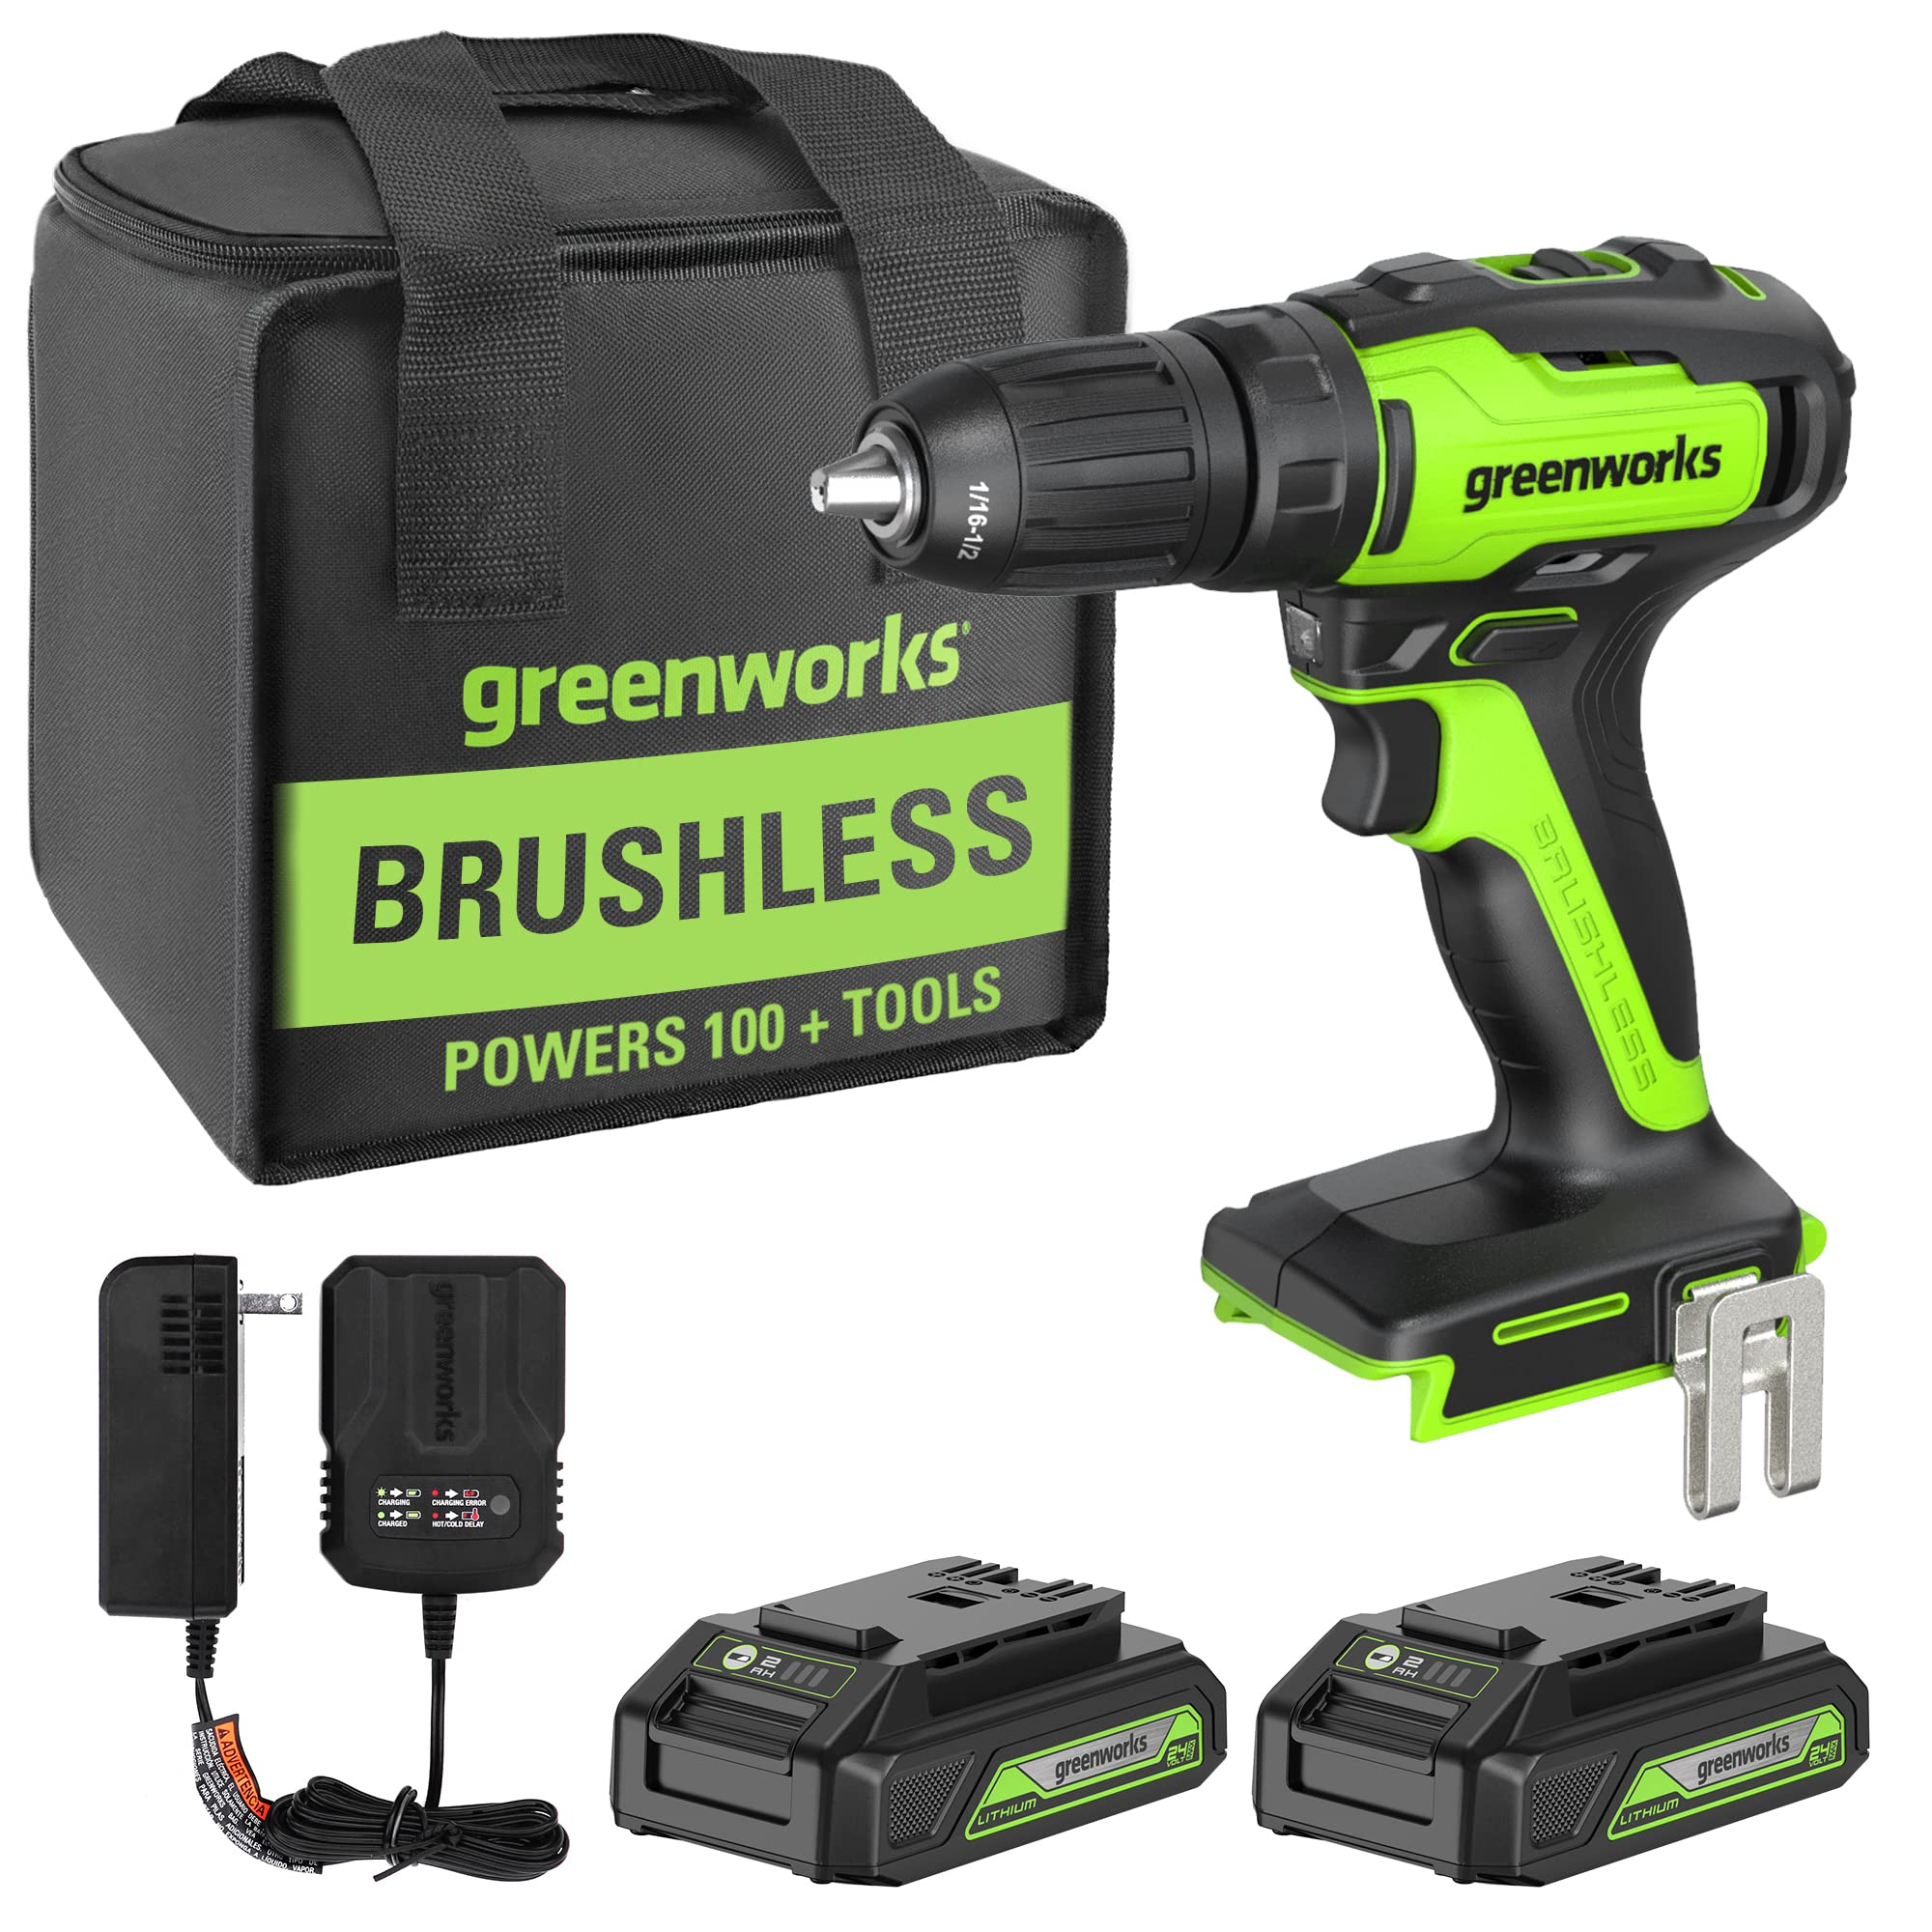 Greenworks 24V Brushless Cordless 1/2-Inch Drill / Driver, (2) 1.5Ah USB Batteries (USB Hub) and Charger Included DD24L1520